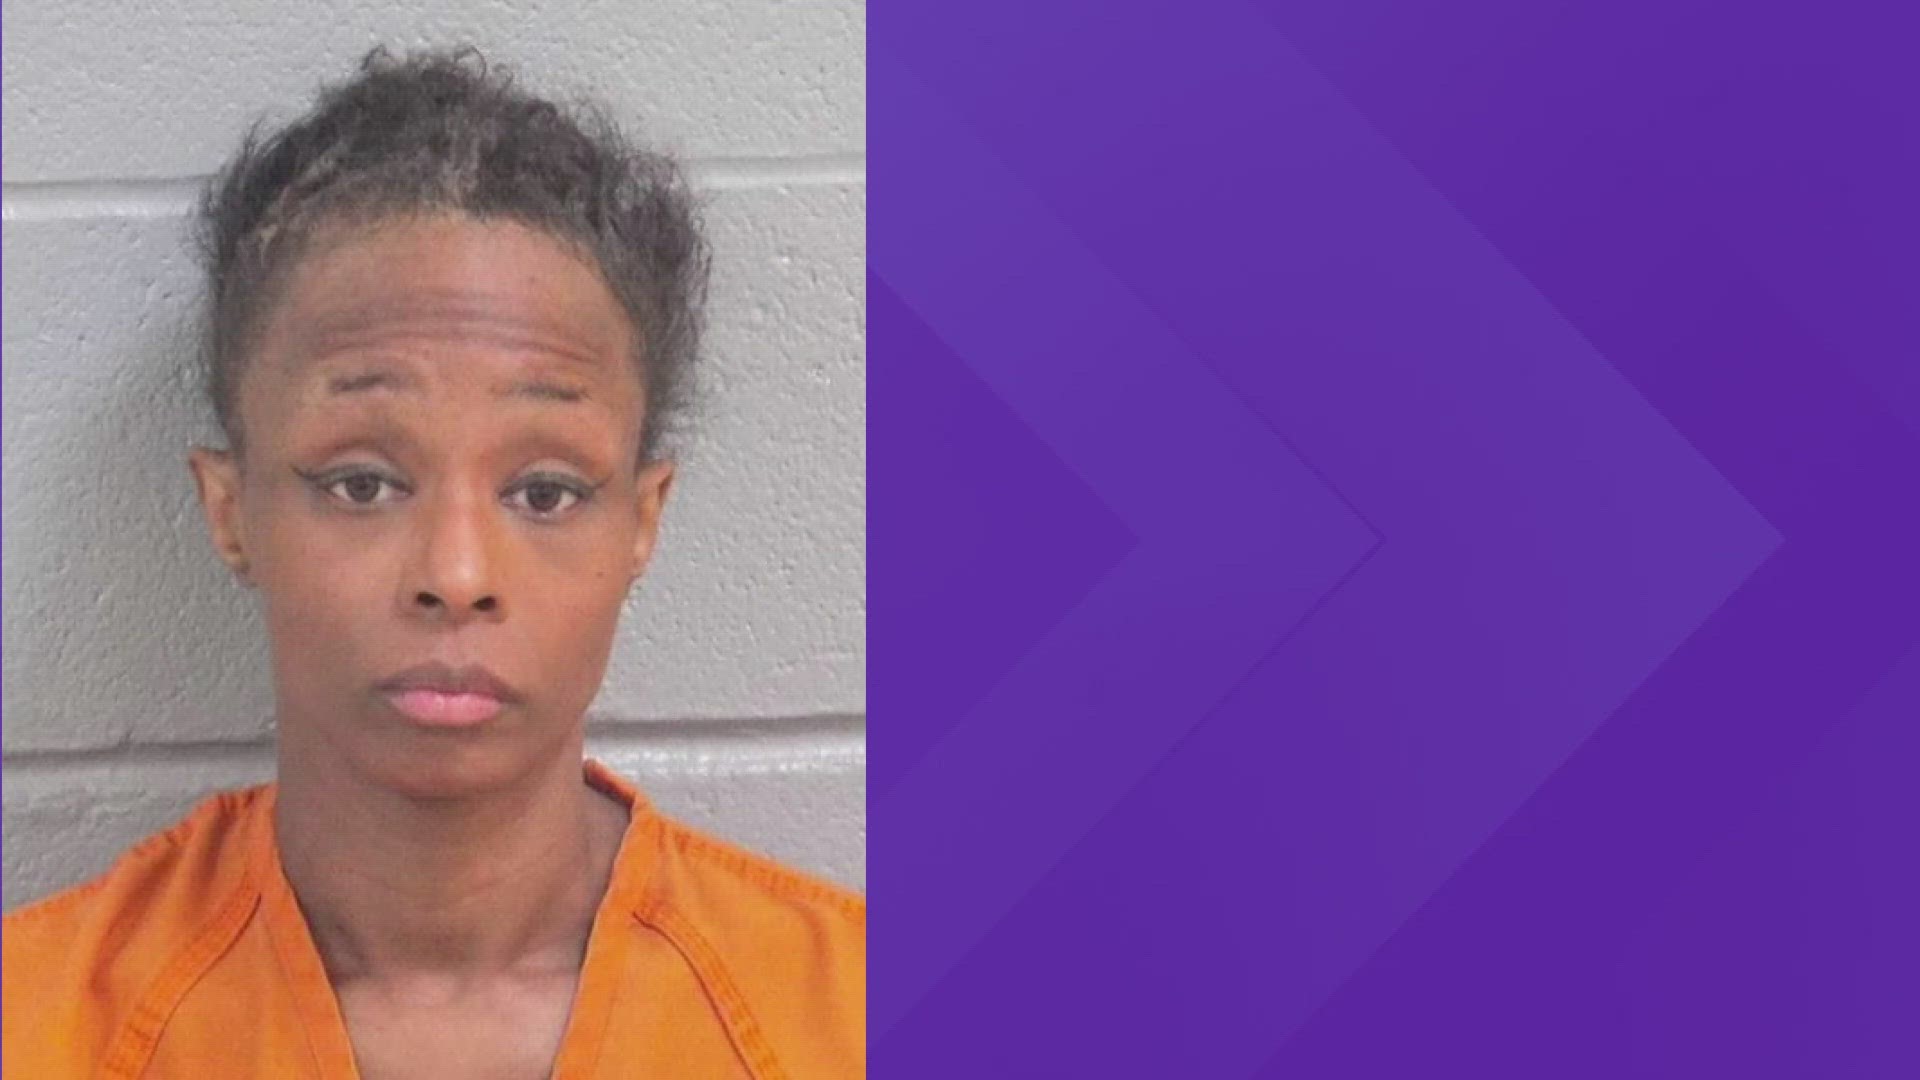 Charlotte Pegues will be having a trial on April 15 for exploitation of a disabled individual, according to Midland District Clerk's Office.